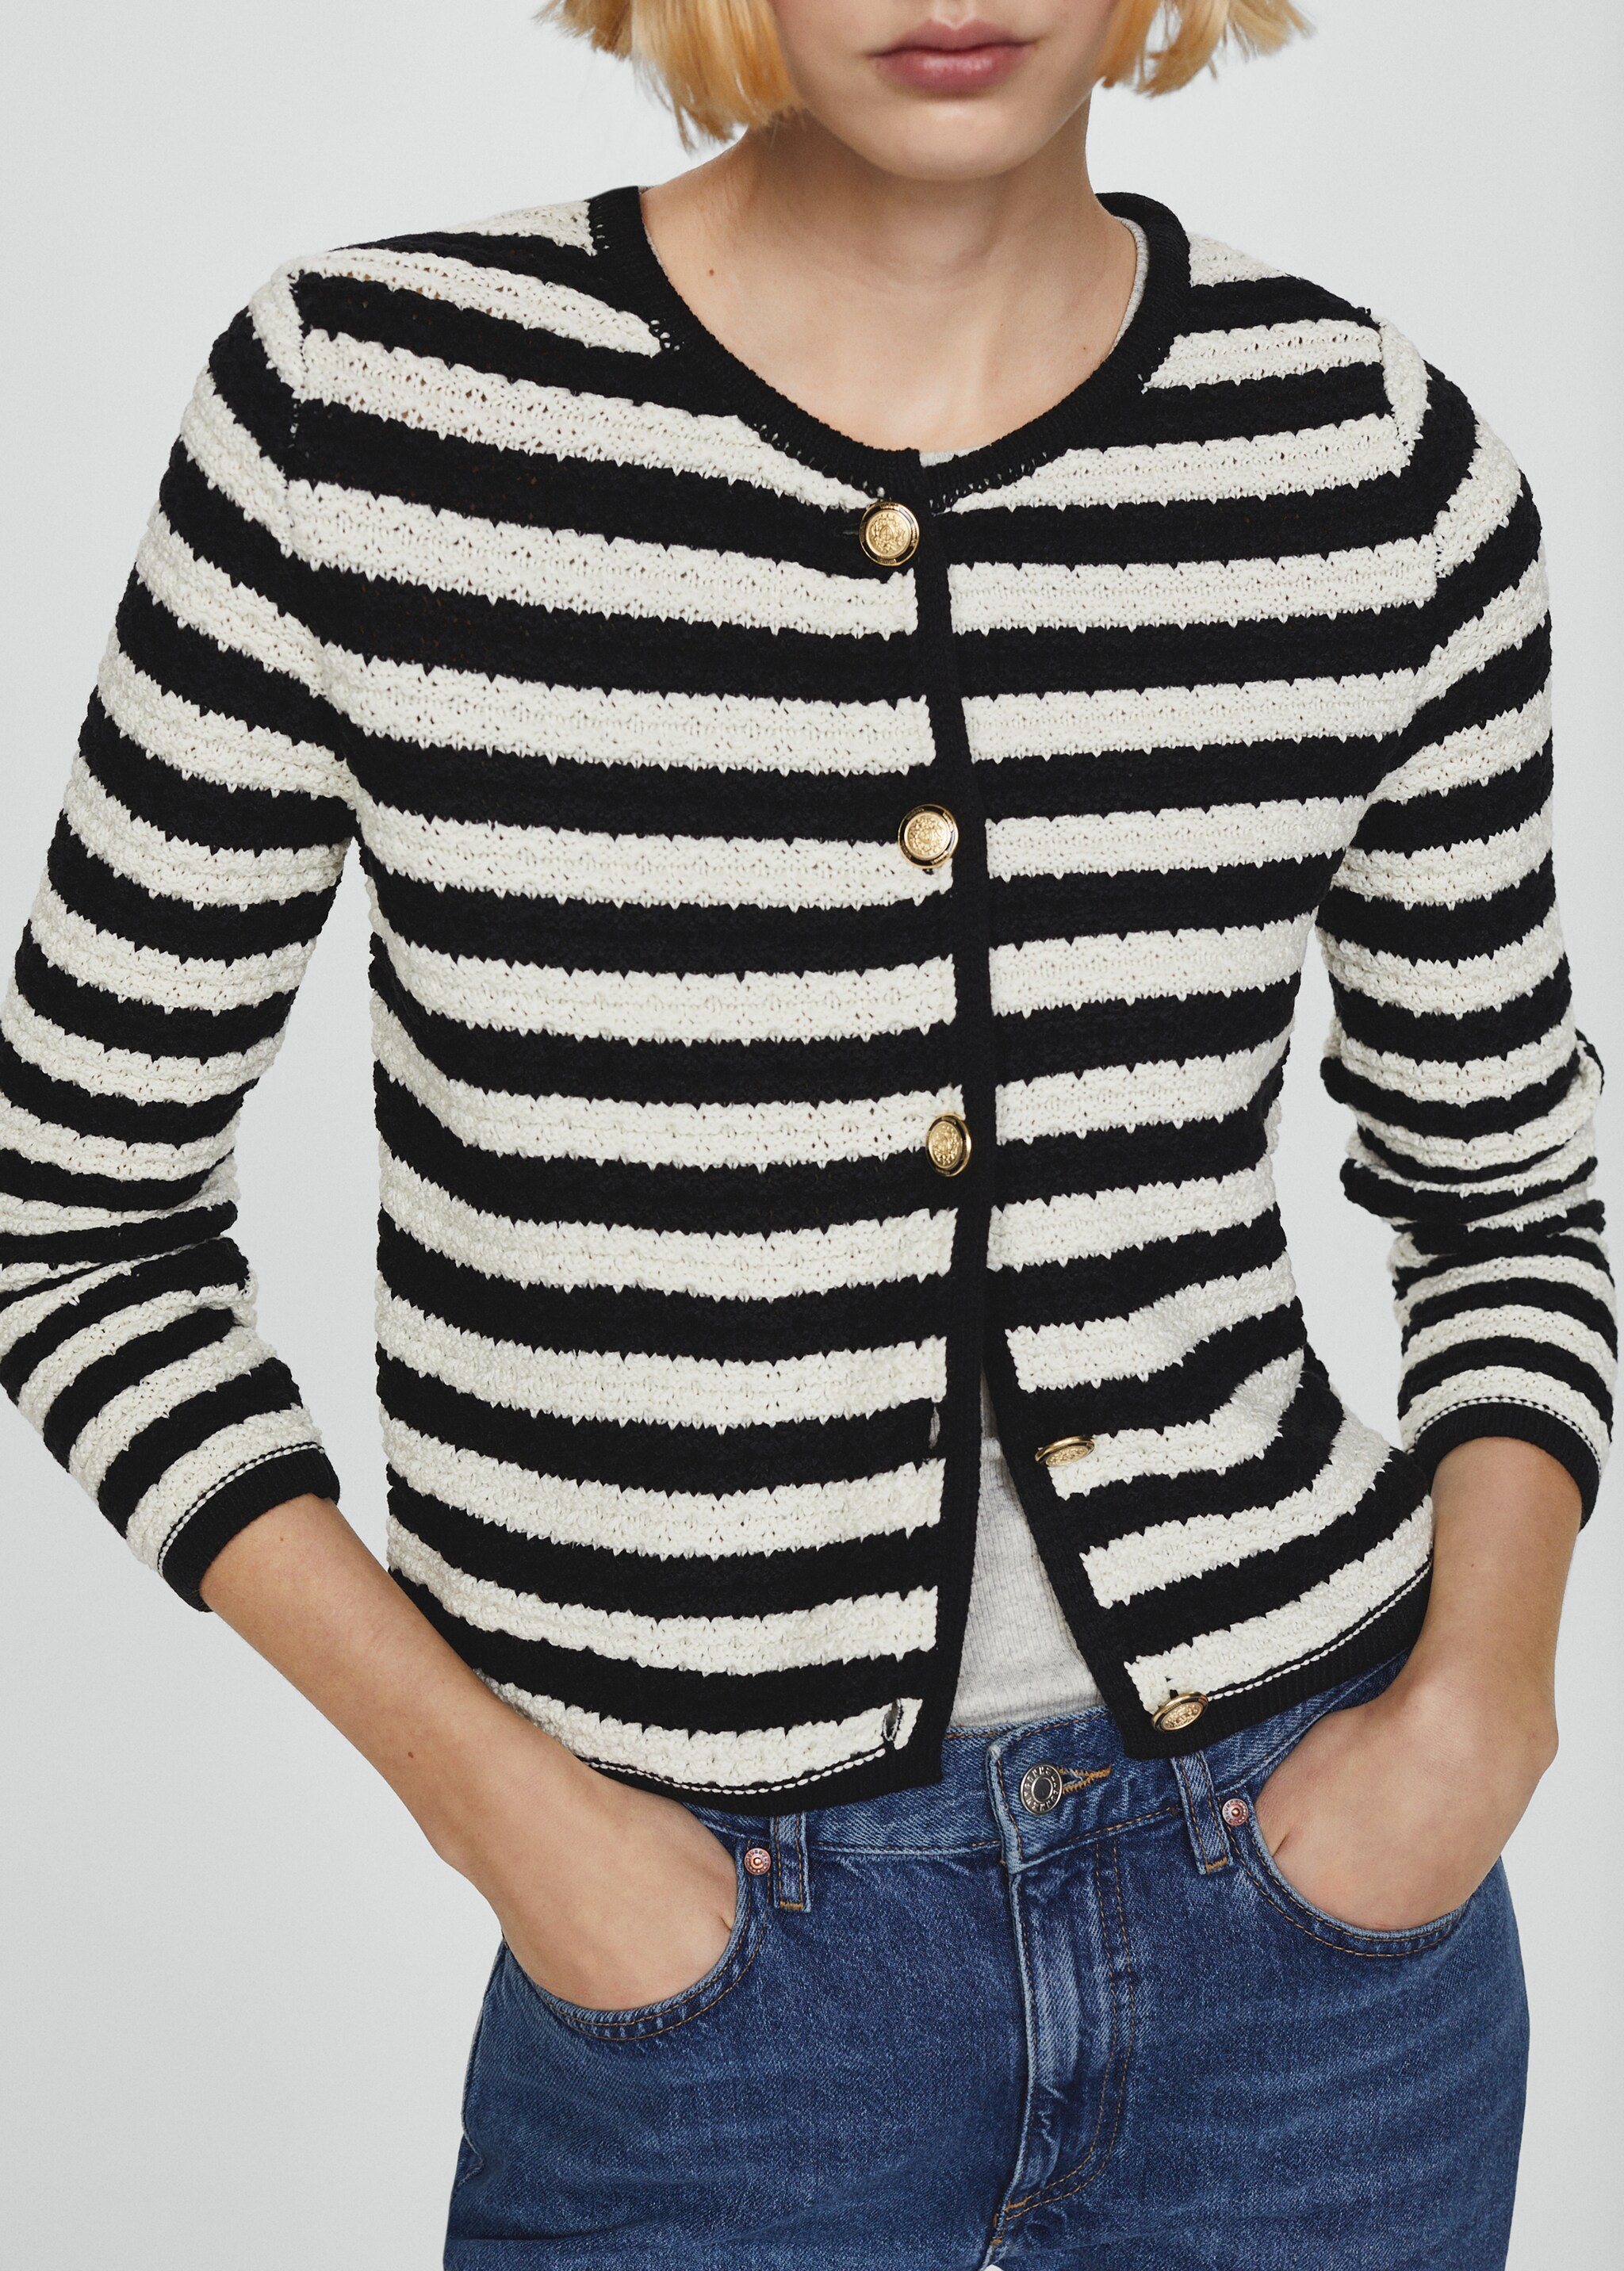 Striped cardigan with jewel buttons - Details of the article 6